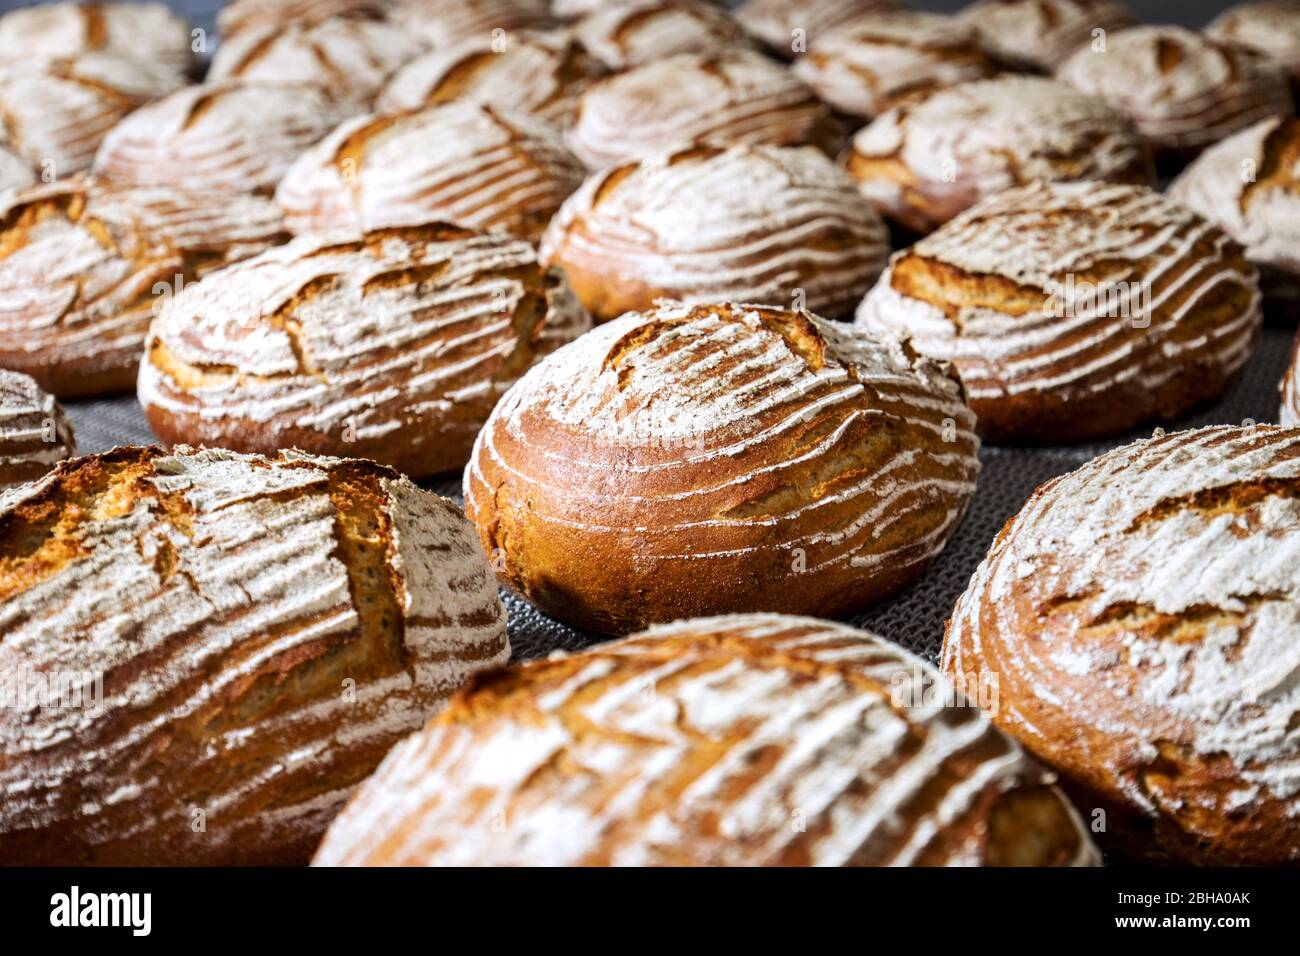 Industrial bakery line process of bread production Stock Photo